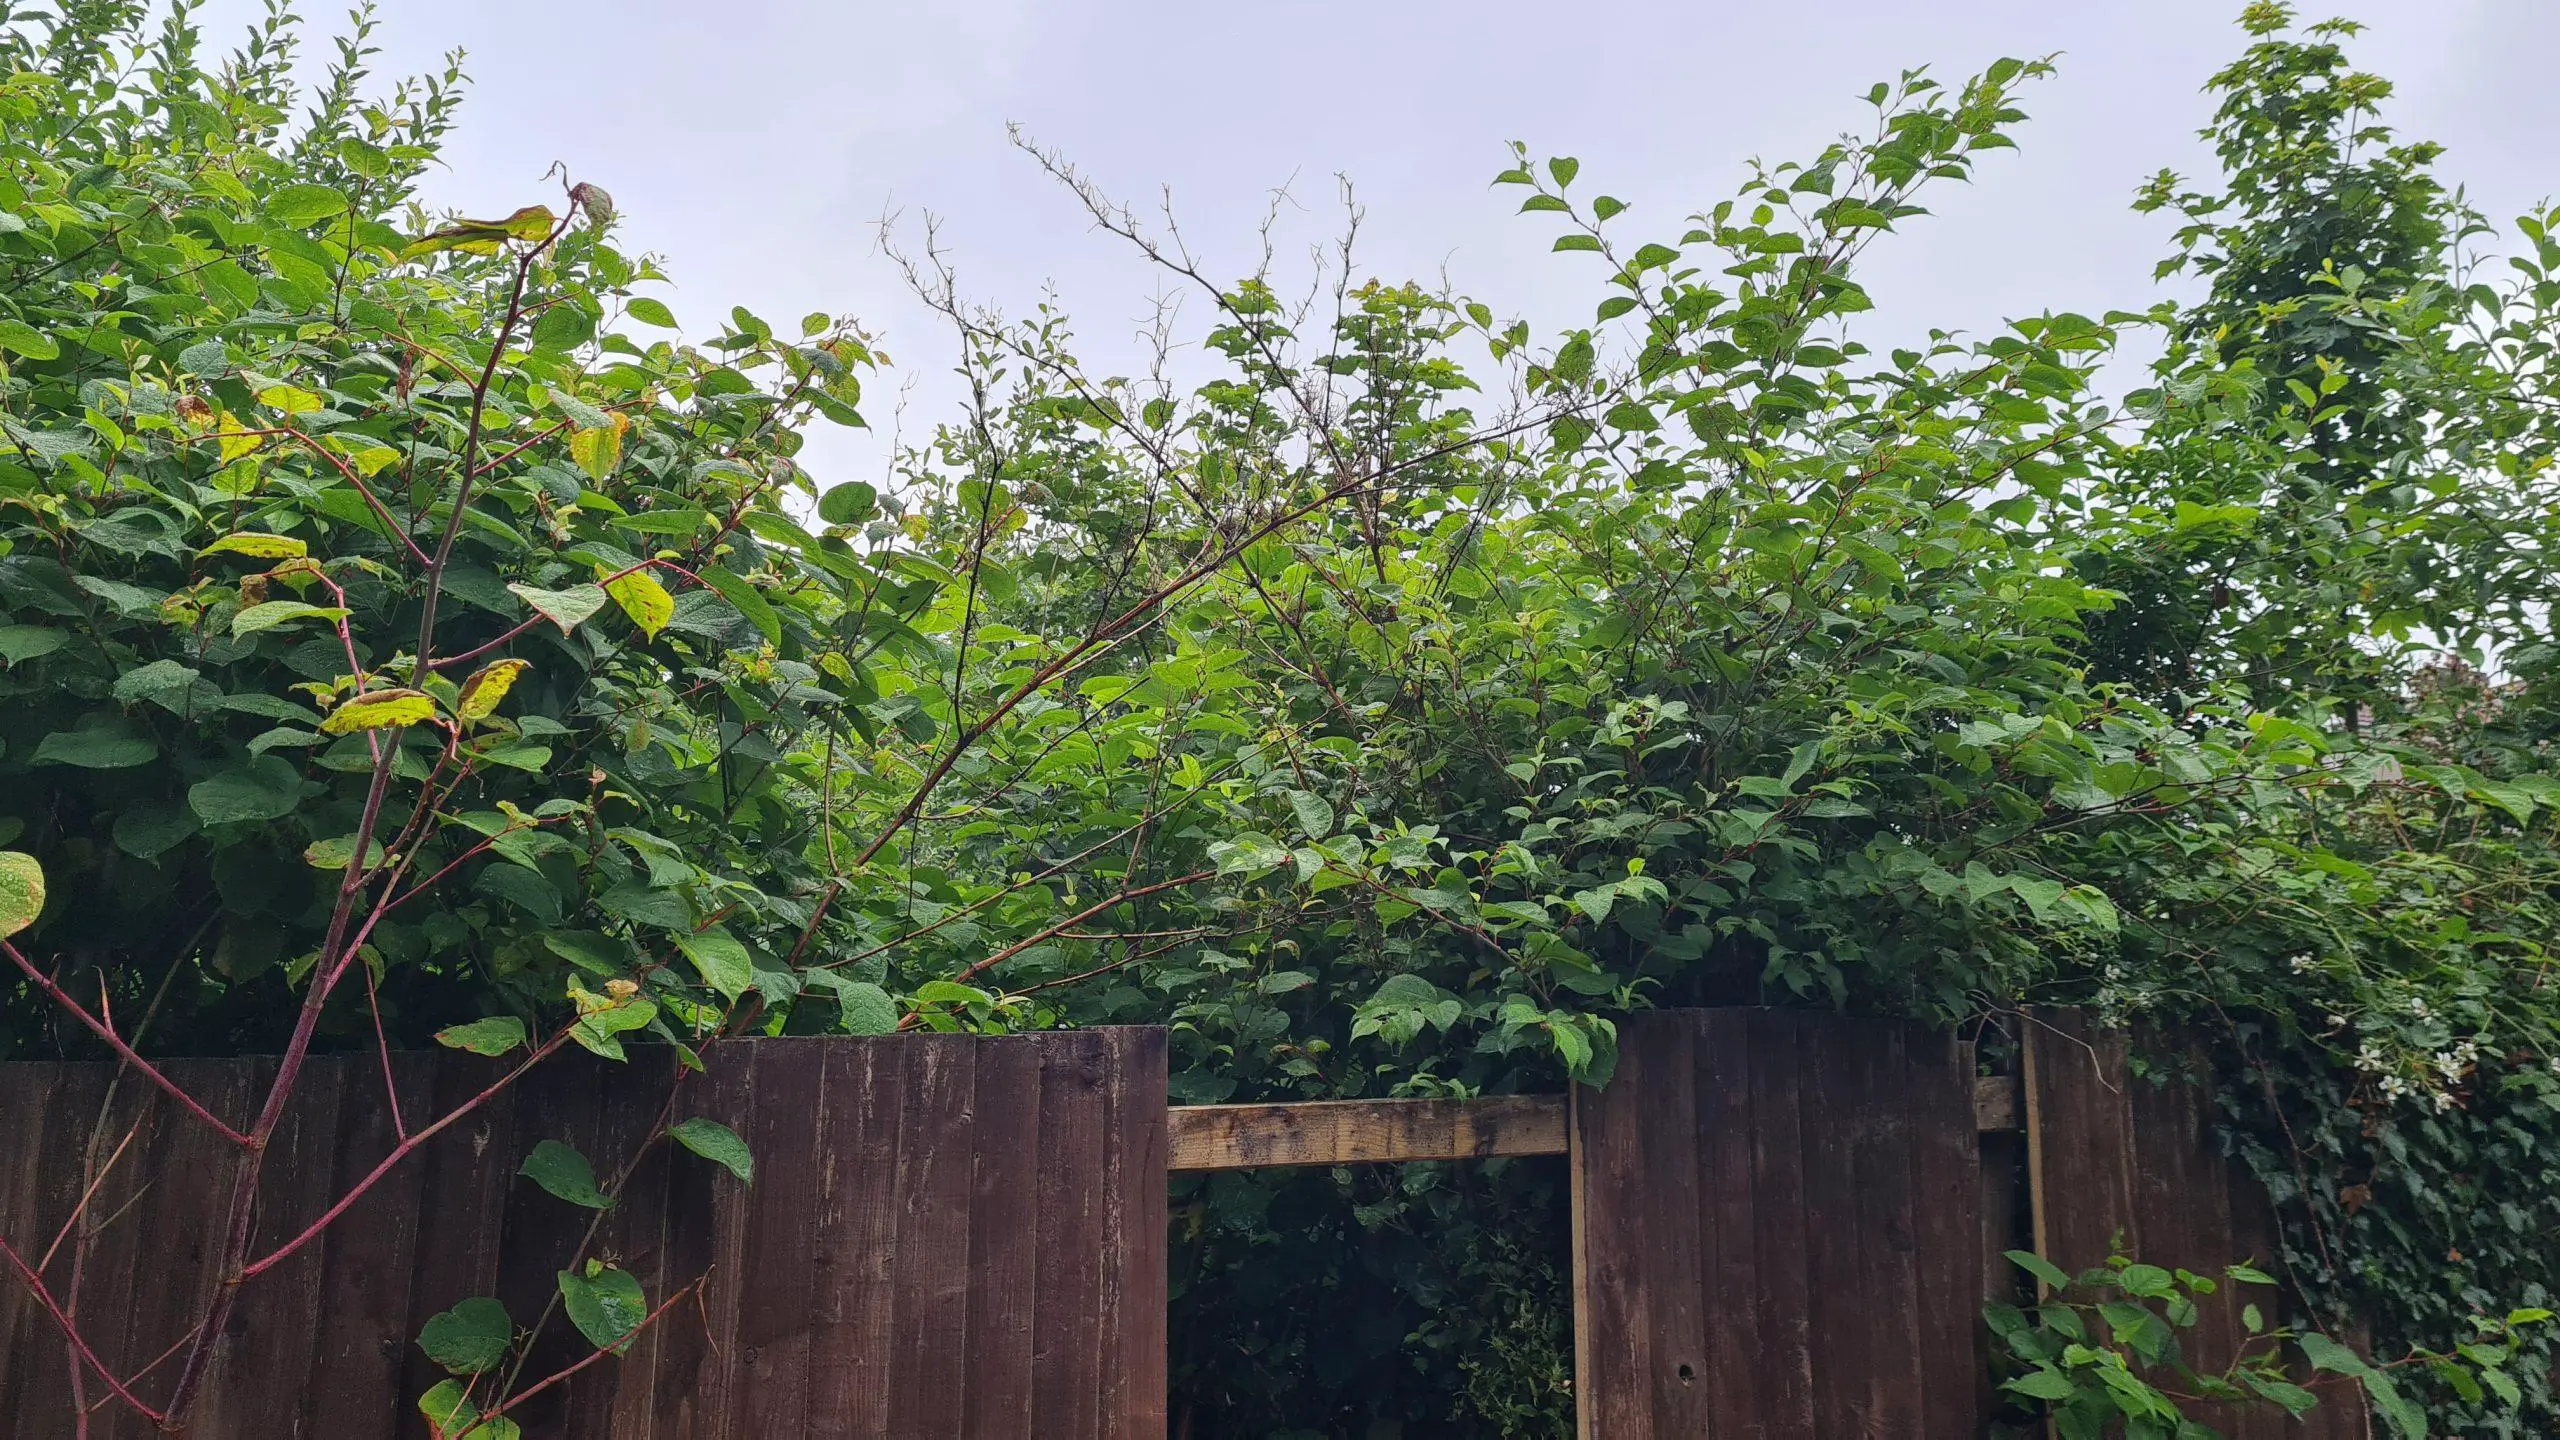 When Japanese knotweed grows to its full height and density it consumes the area without any other native plants having a chance to flourish